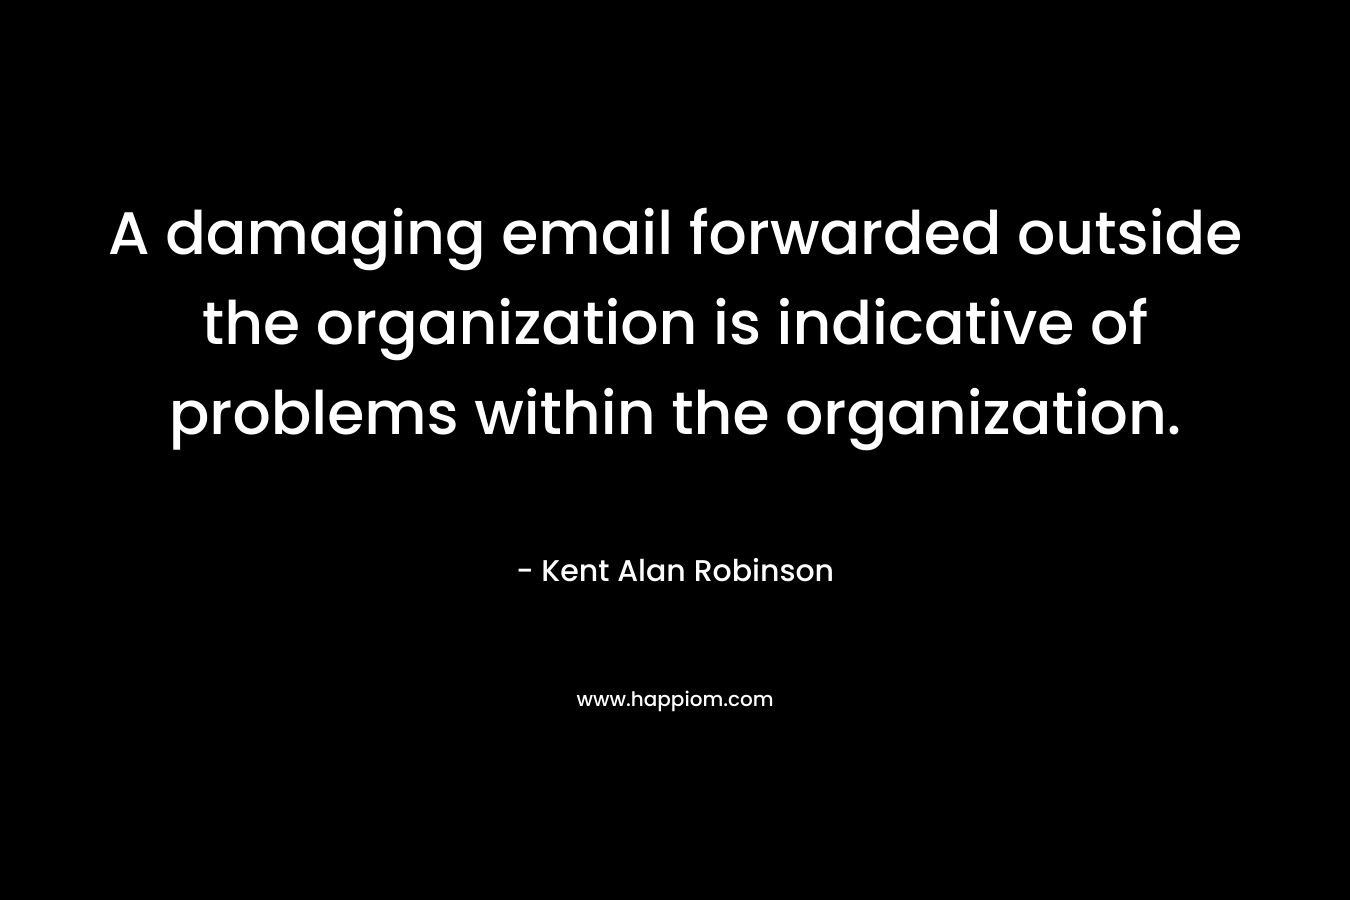 A damaging email forwarded outside the organization is indicative of problems within the organization.